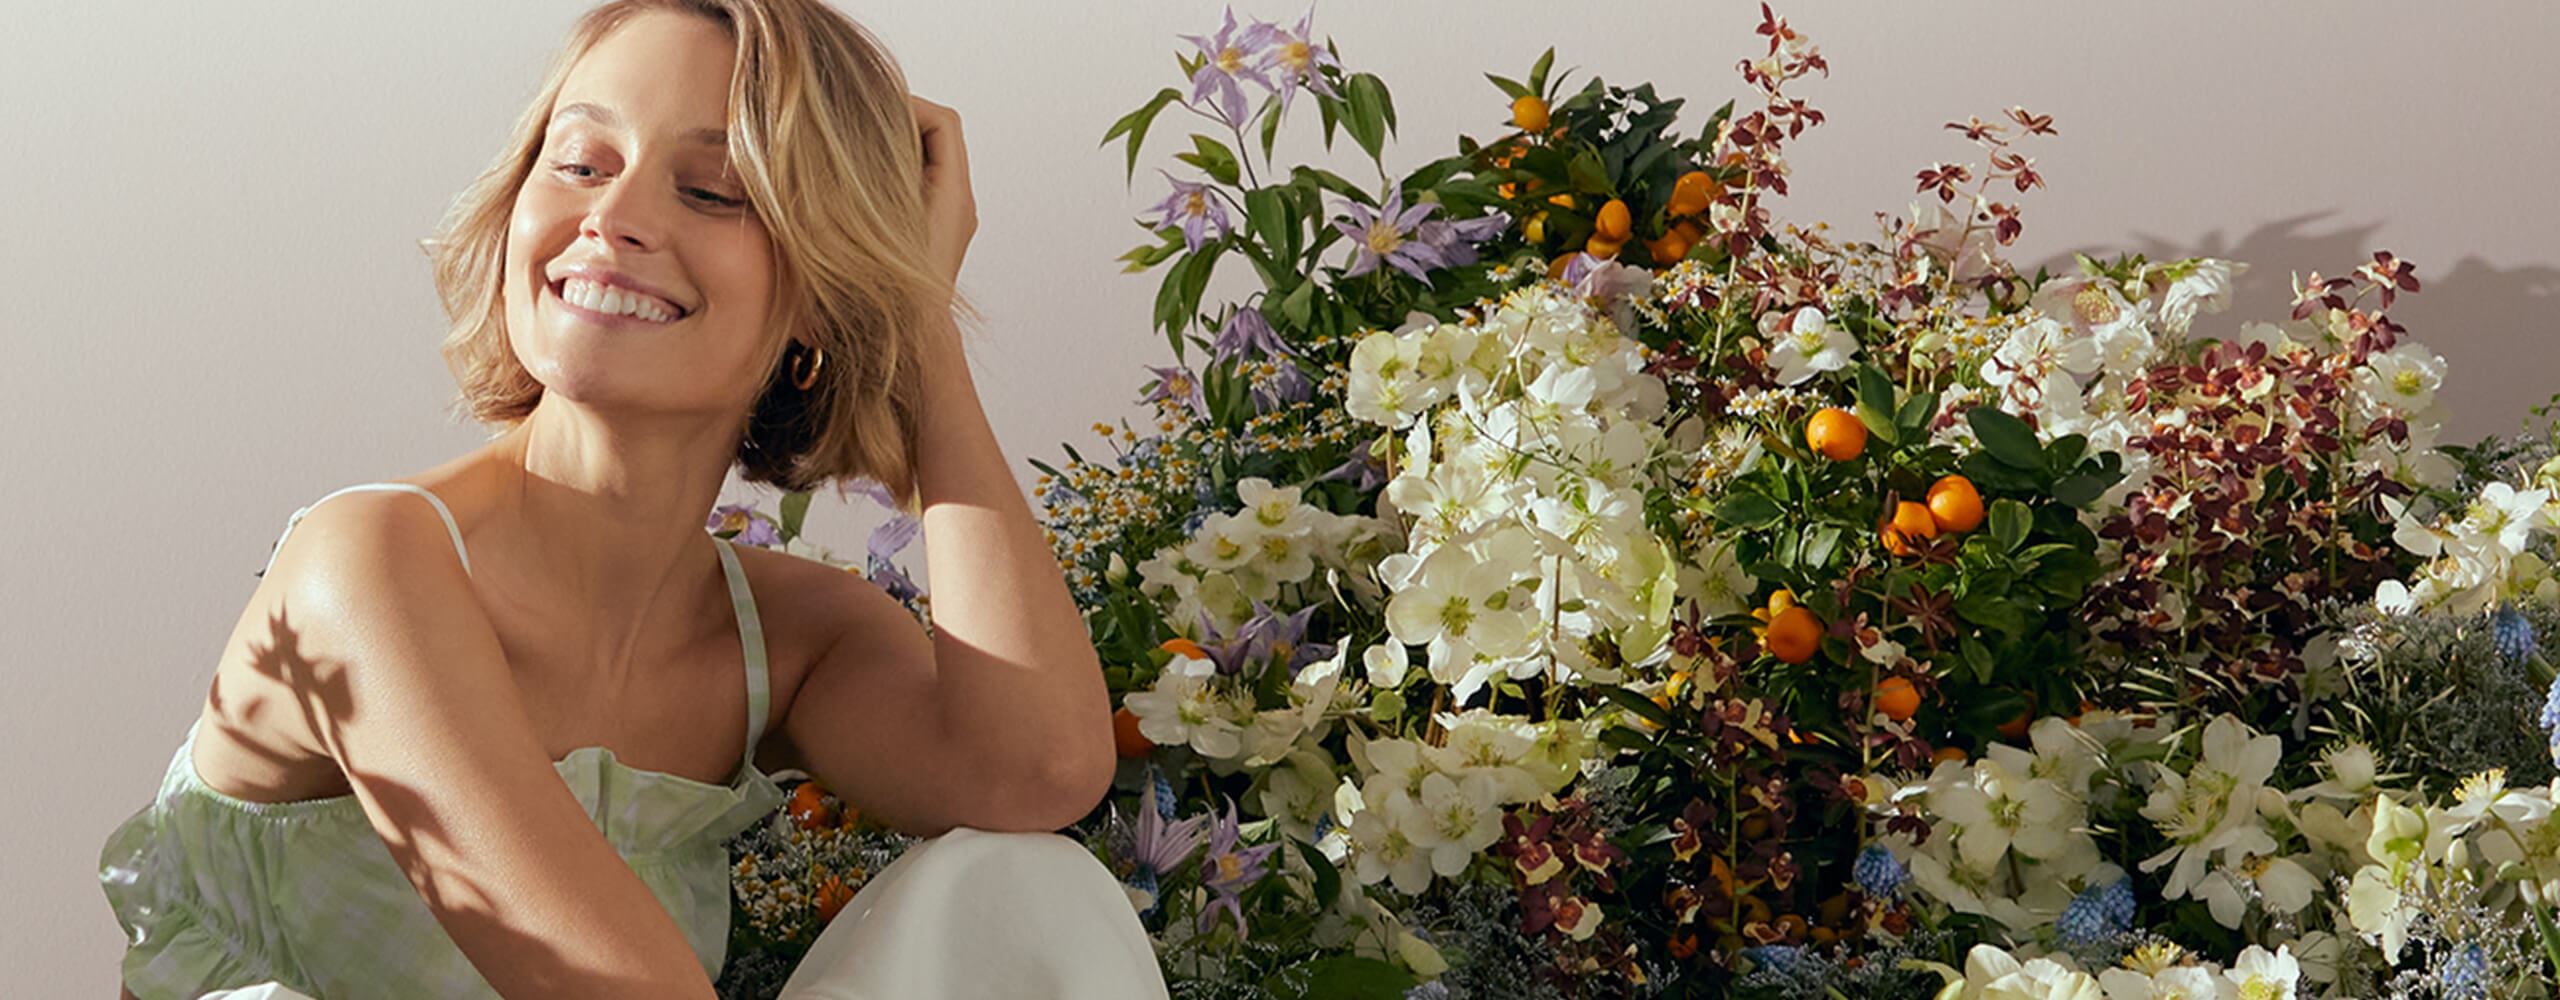 View of a female model with short blonde hair looking downwards with a floral arrangement behind.